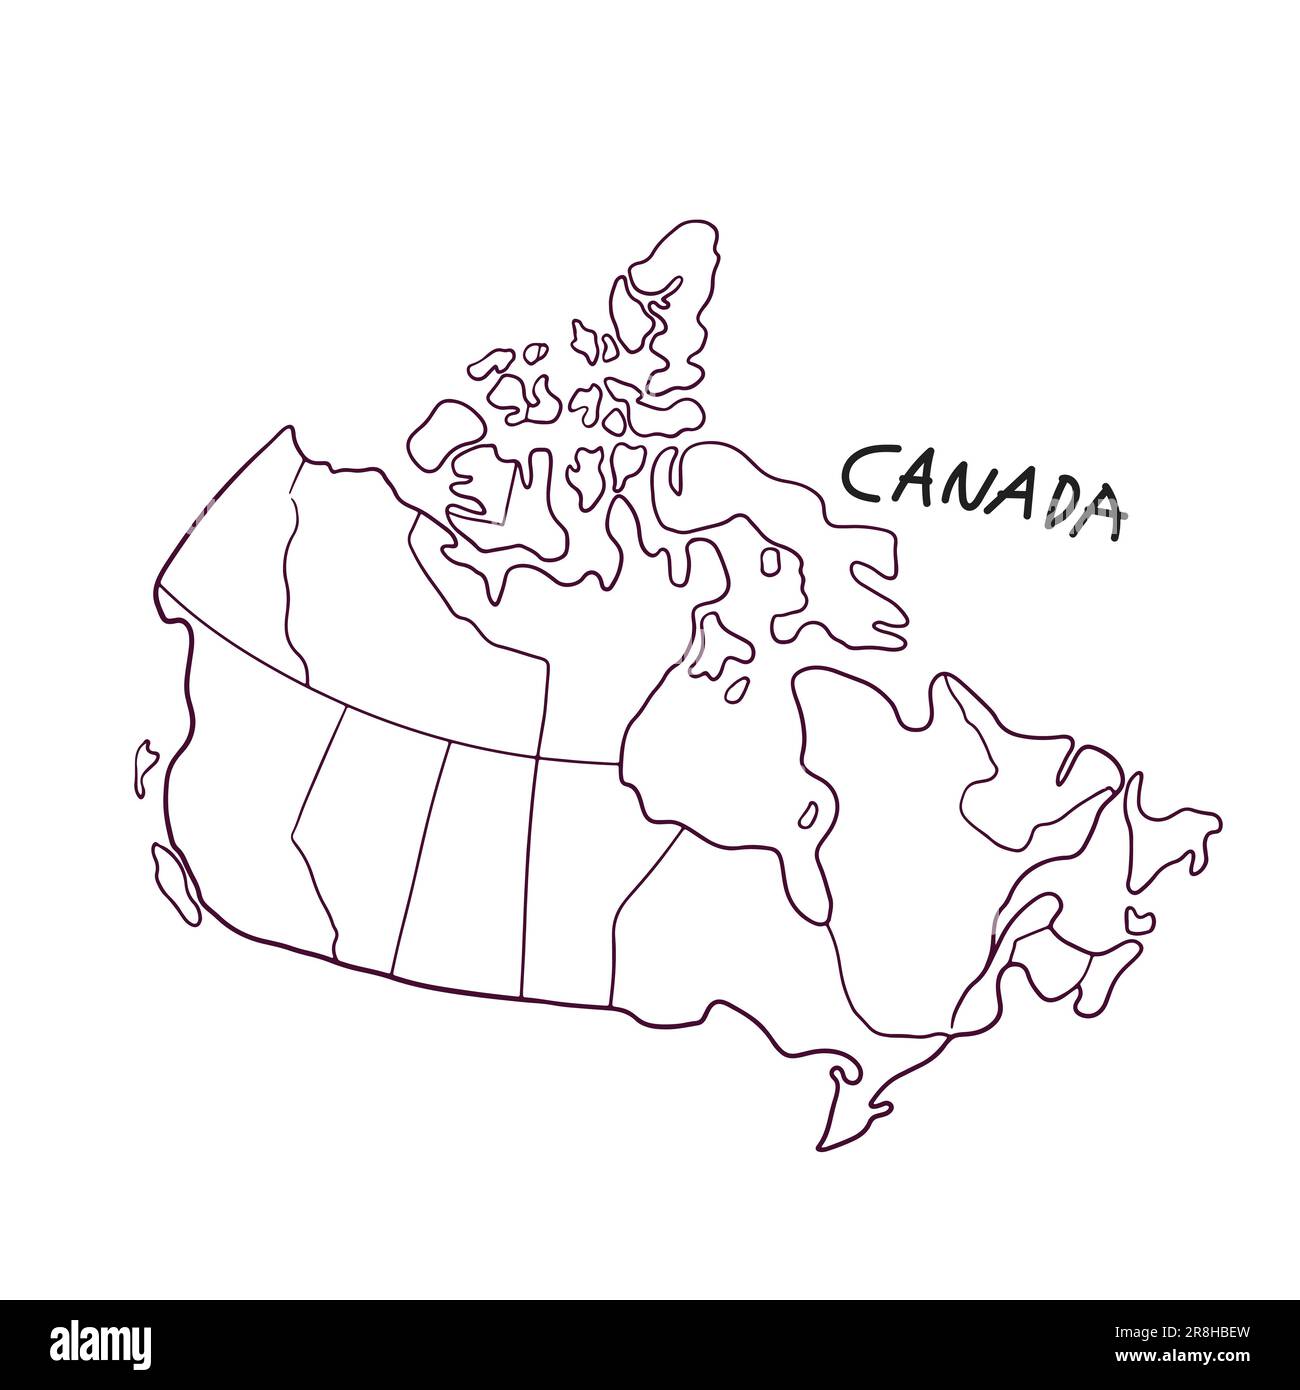 Hand Drawn Doodle Map Of Canada Stock Vector